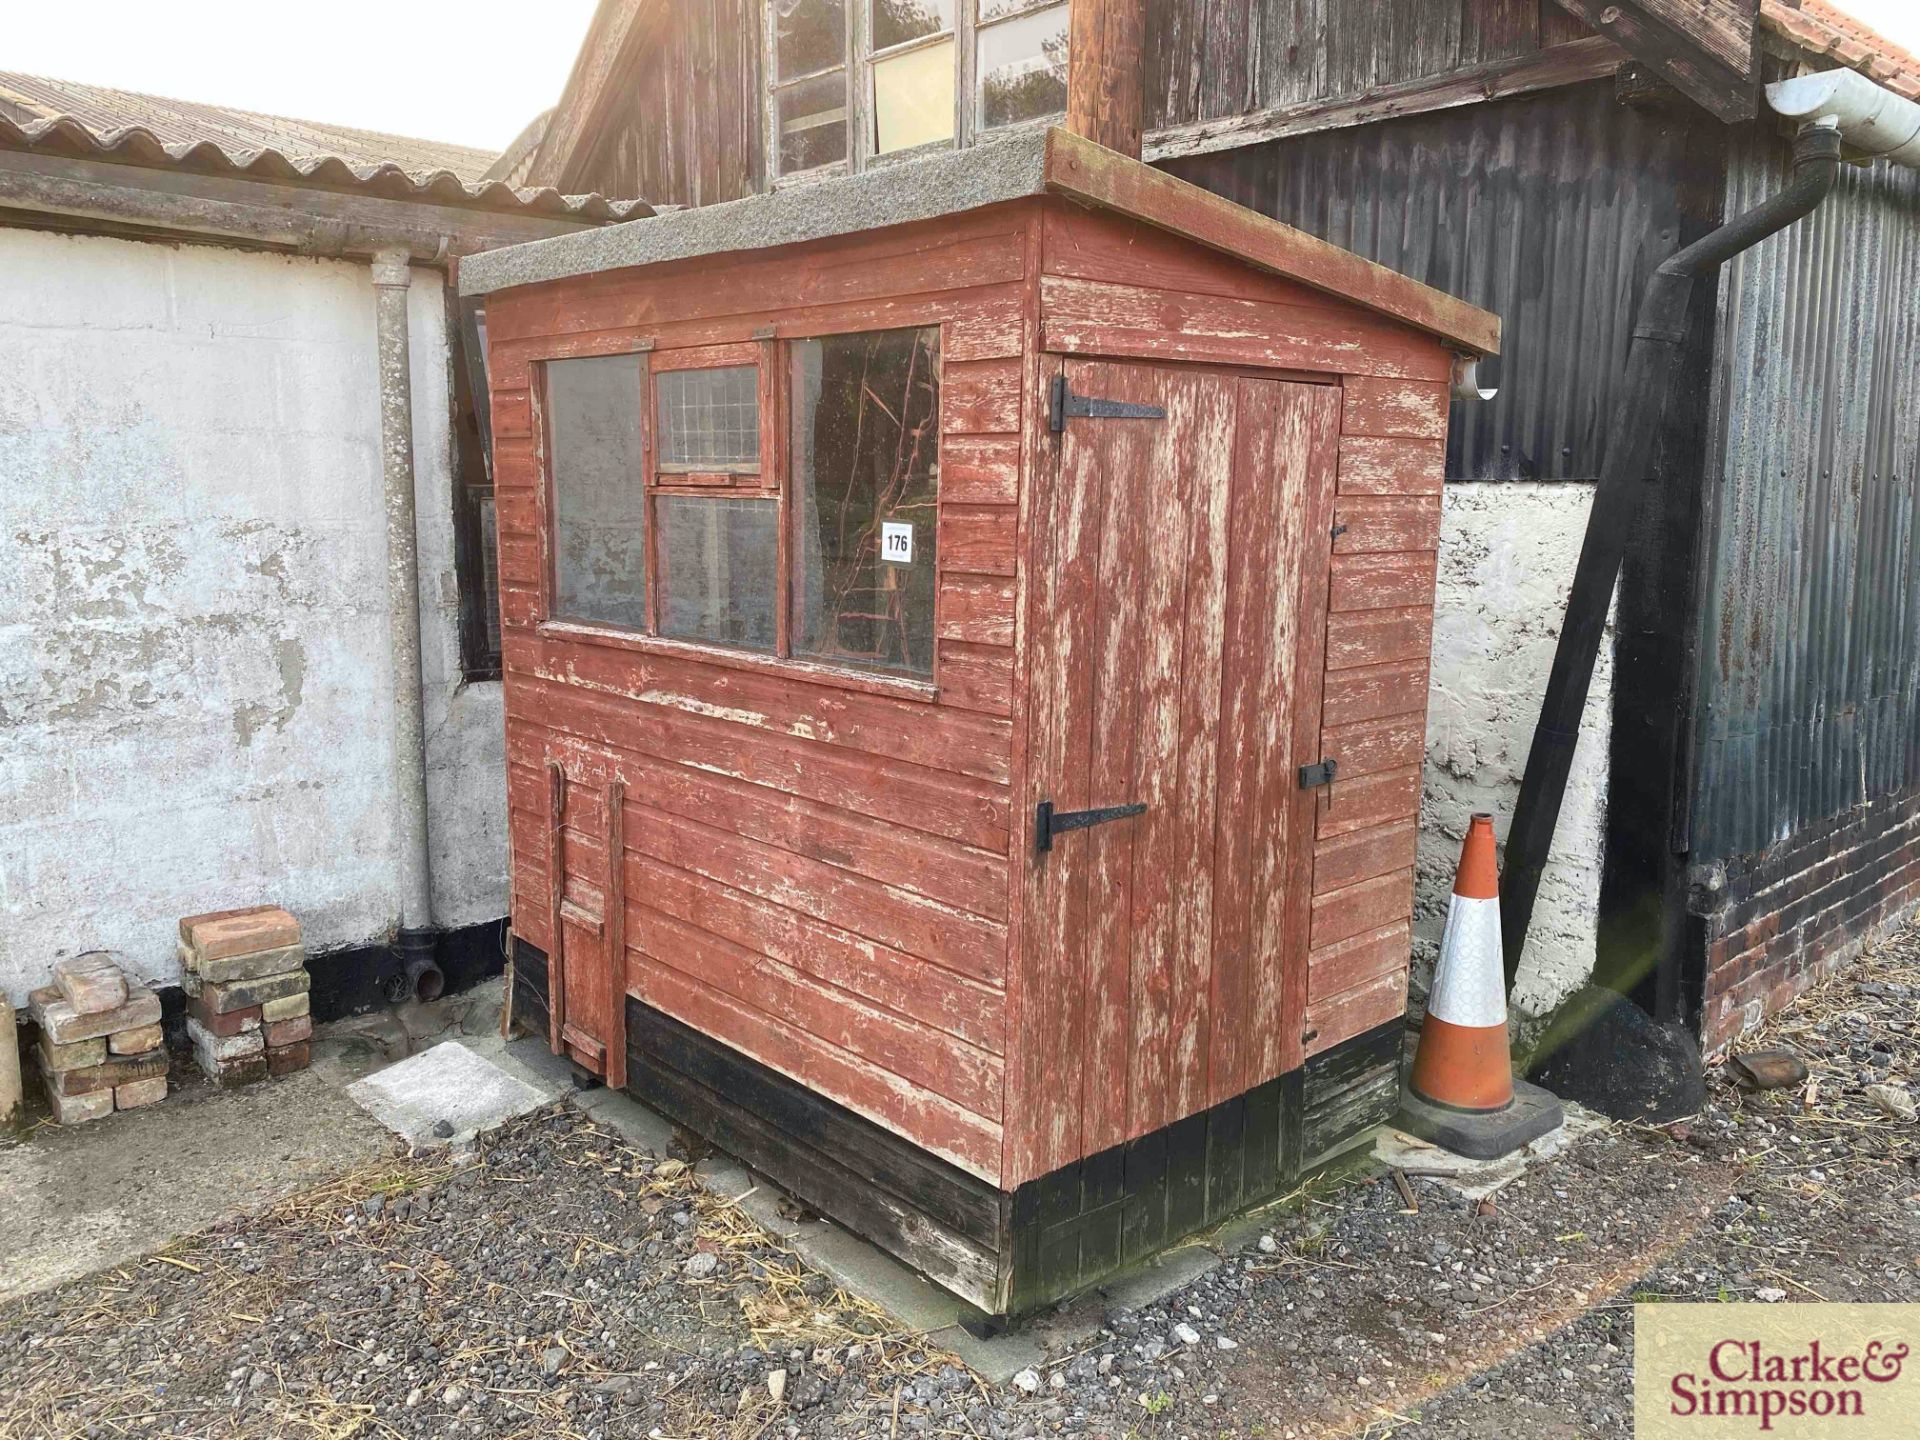 6ft x 4ft garden shed.